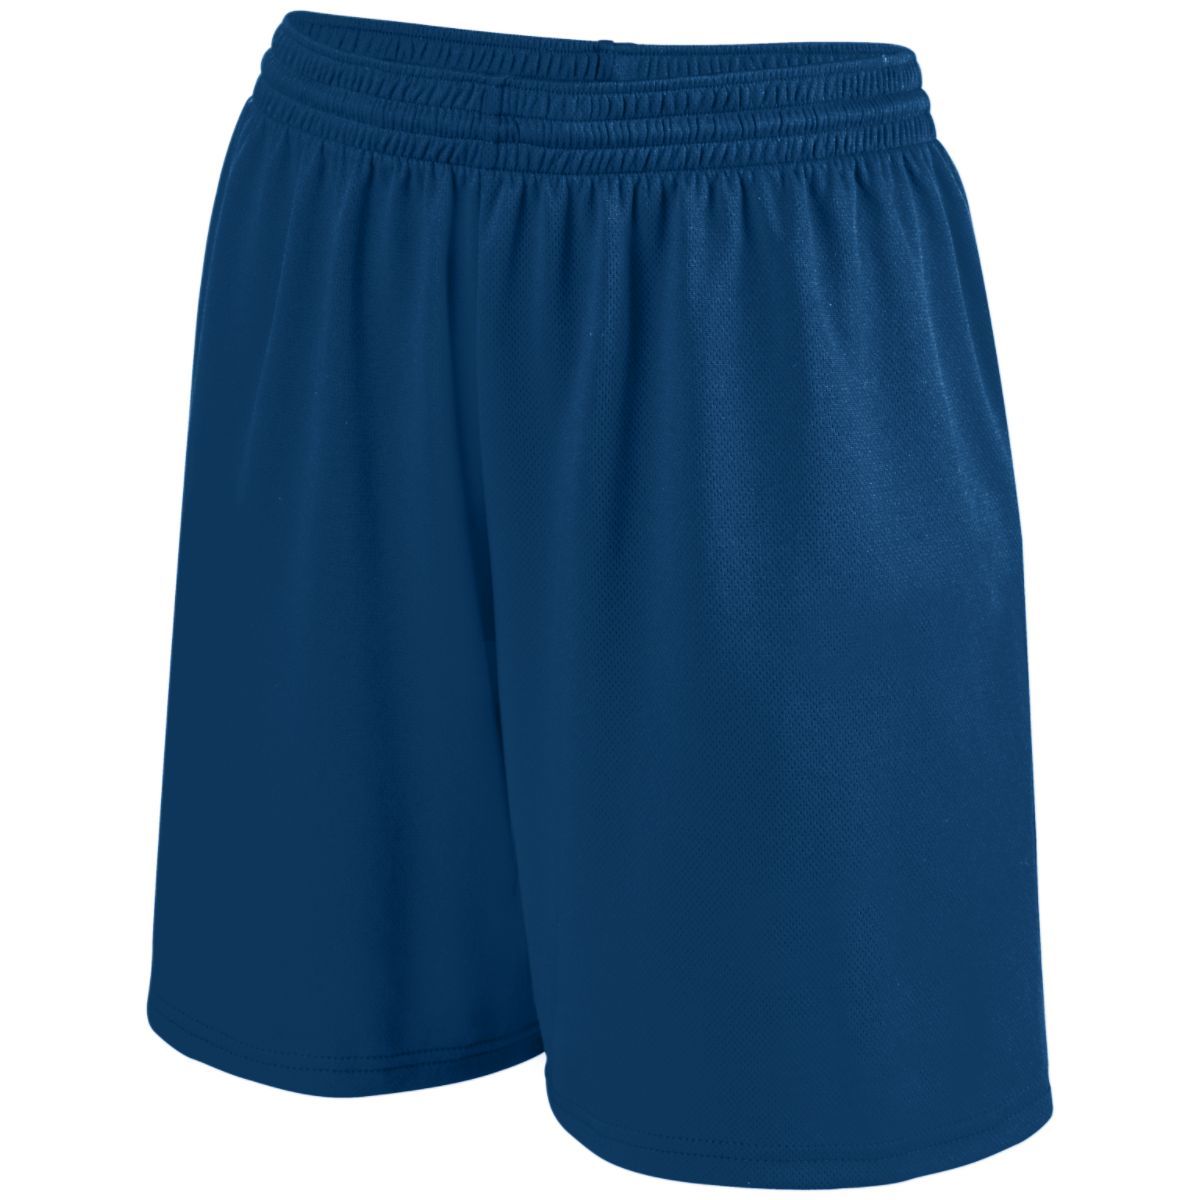 Augusta Sportswear Girls Shockwave Shorts in Navy/White  -Part of the Girls, Augusta-Products, Softball, Girls-Shorts product lines at KanaleyCreations.com